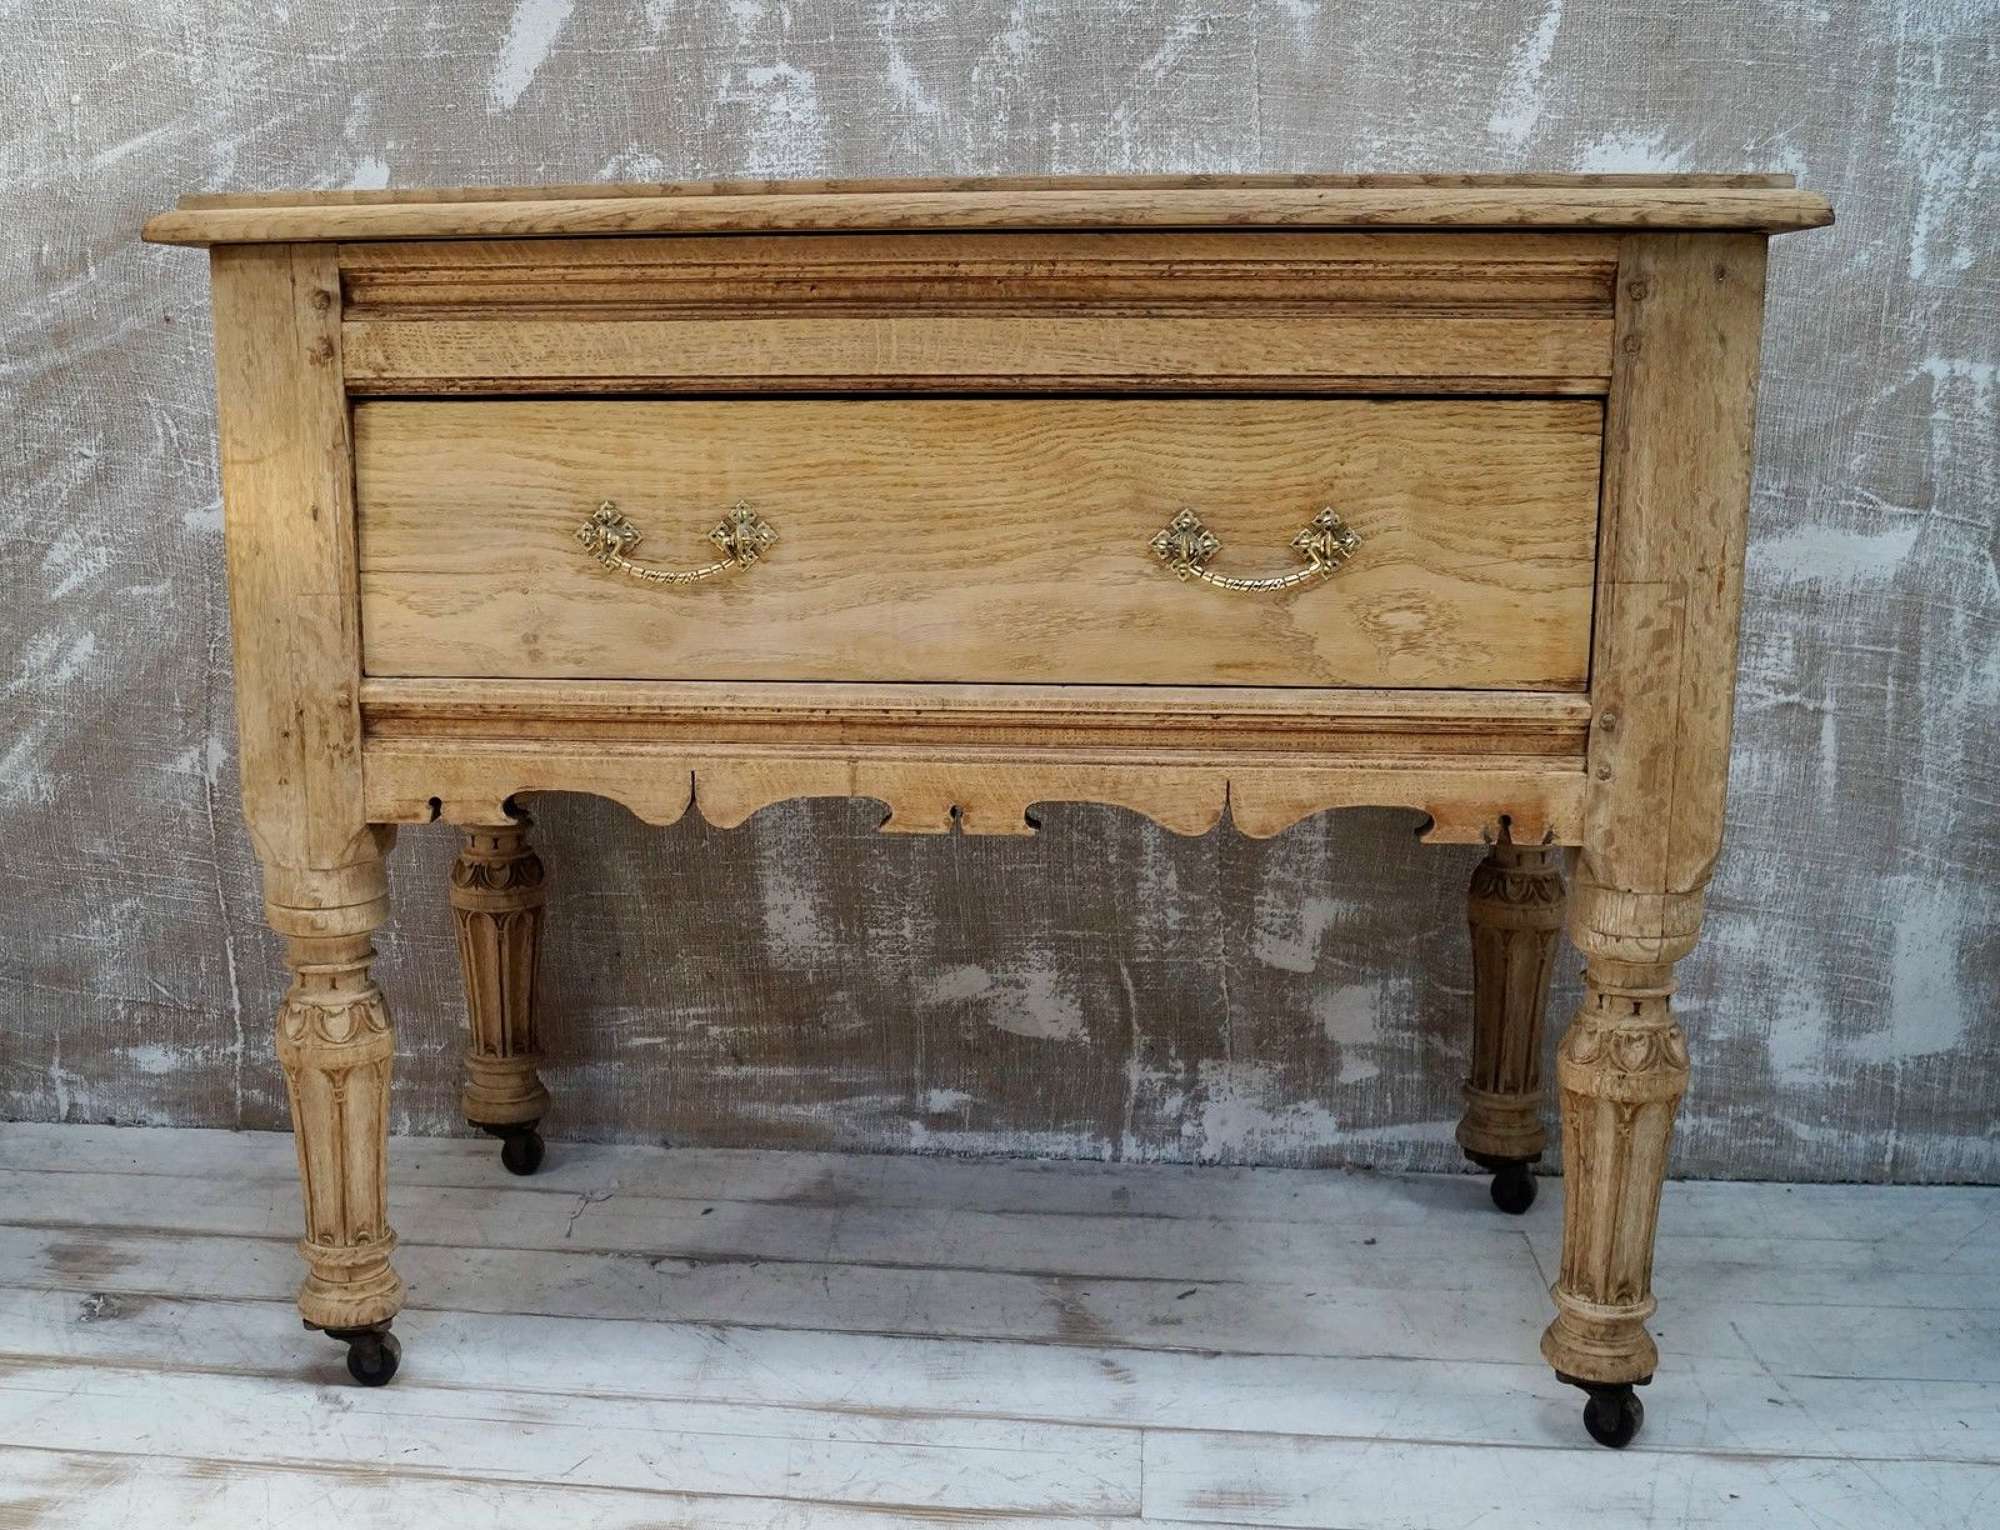 Victorian Bleached Oak Scullery Table